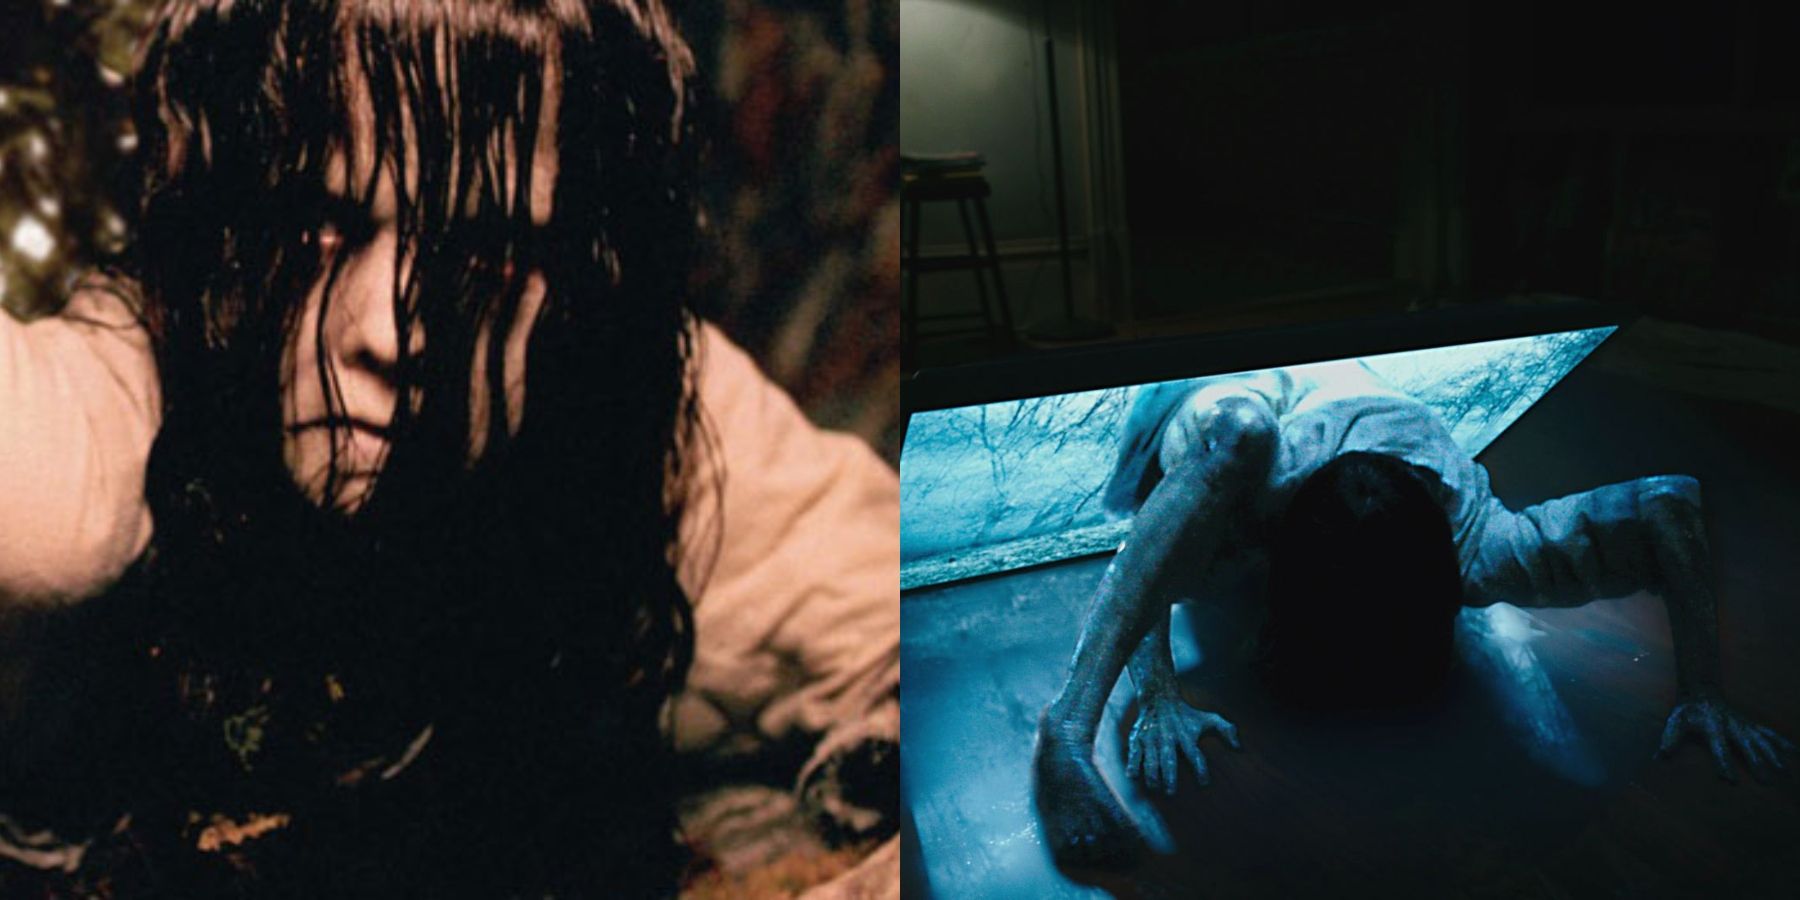 How To Watch All 'The Ring' Movies in Order